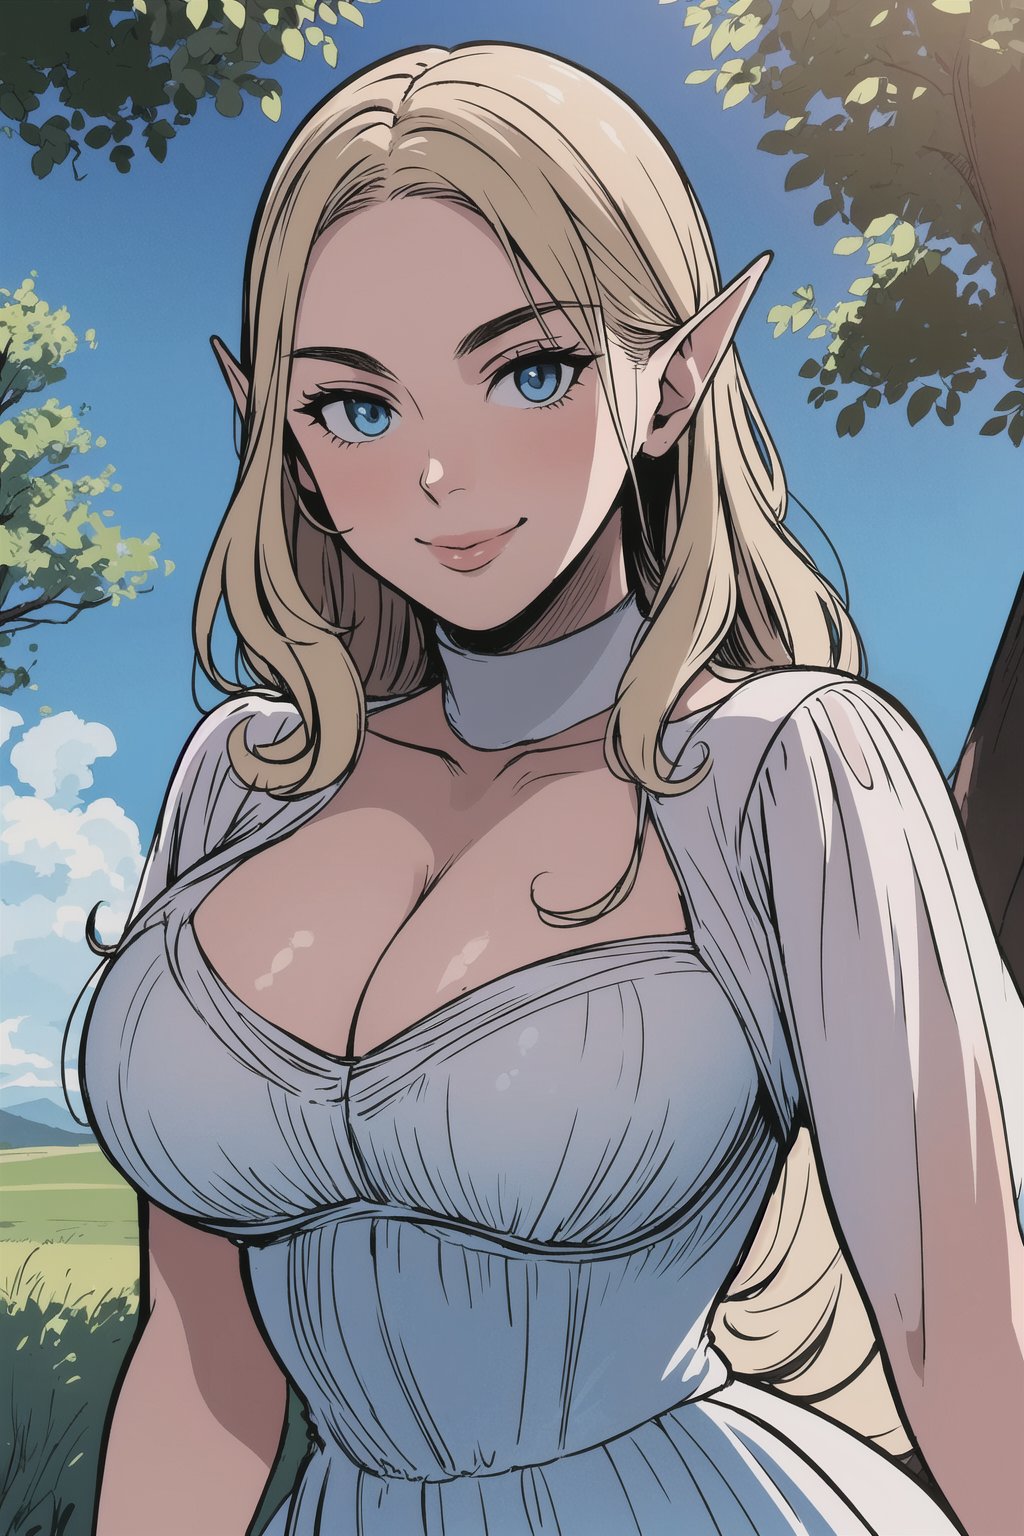 woman\(20 year old, elf Flieger, young, long blonde curly hair, blue eyes, wearing white dress, pouty lips, large cleavage\), standing, staring at you seductively with a smile on her face, upper body, background(day, outdoor, sky, sun, castle, flowers, trees) (masterpiece, highres, high quality:1.2), ambient occlusion, outstanding colors, low saturation,High detailed, Detailedface, Dreamscape